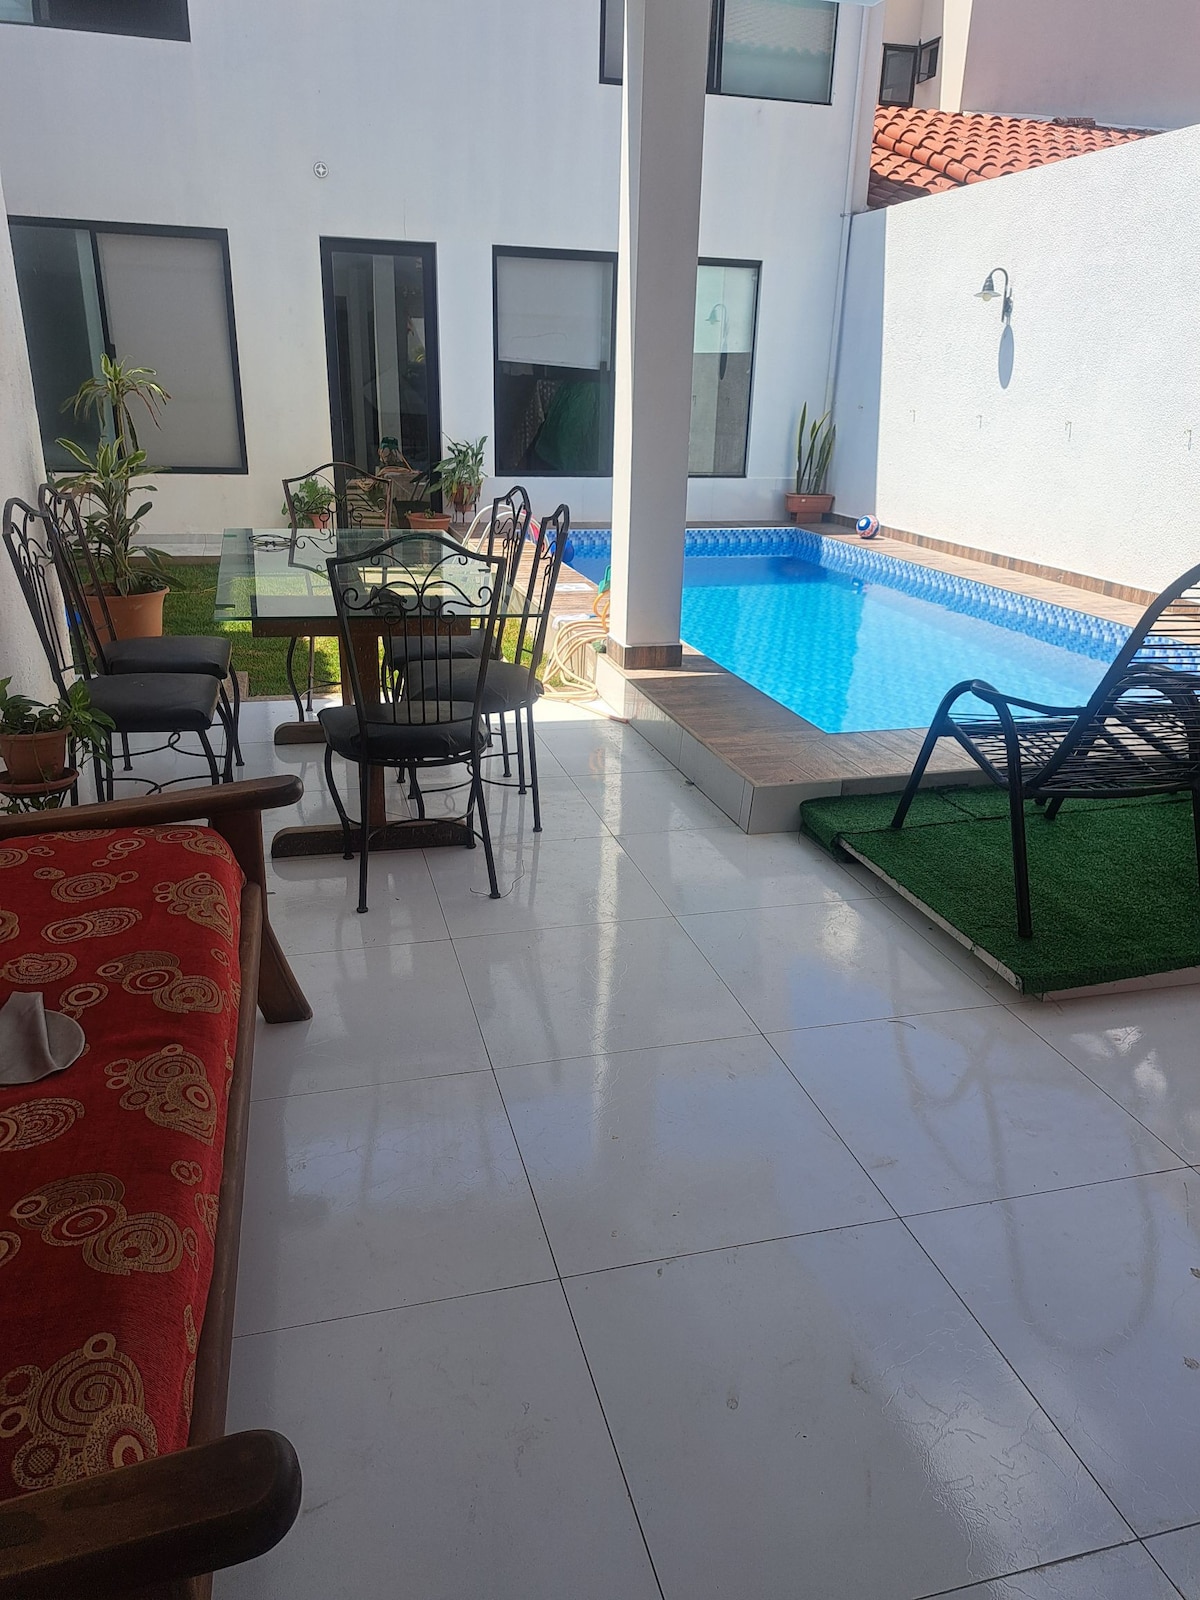 Comfortable guesthouse with swimming pool